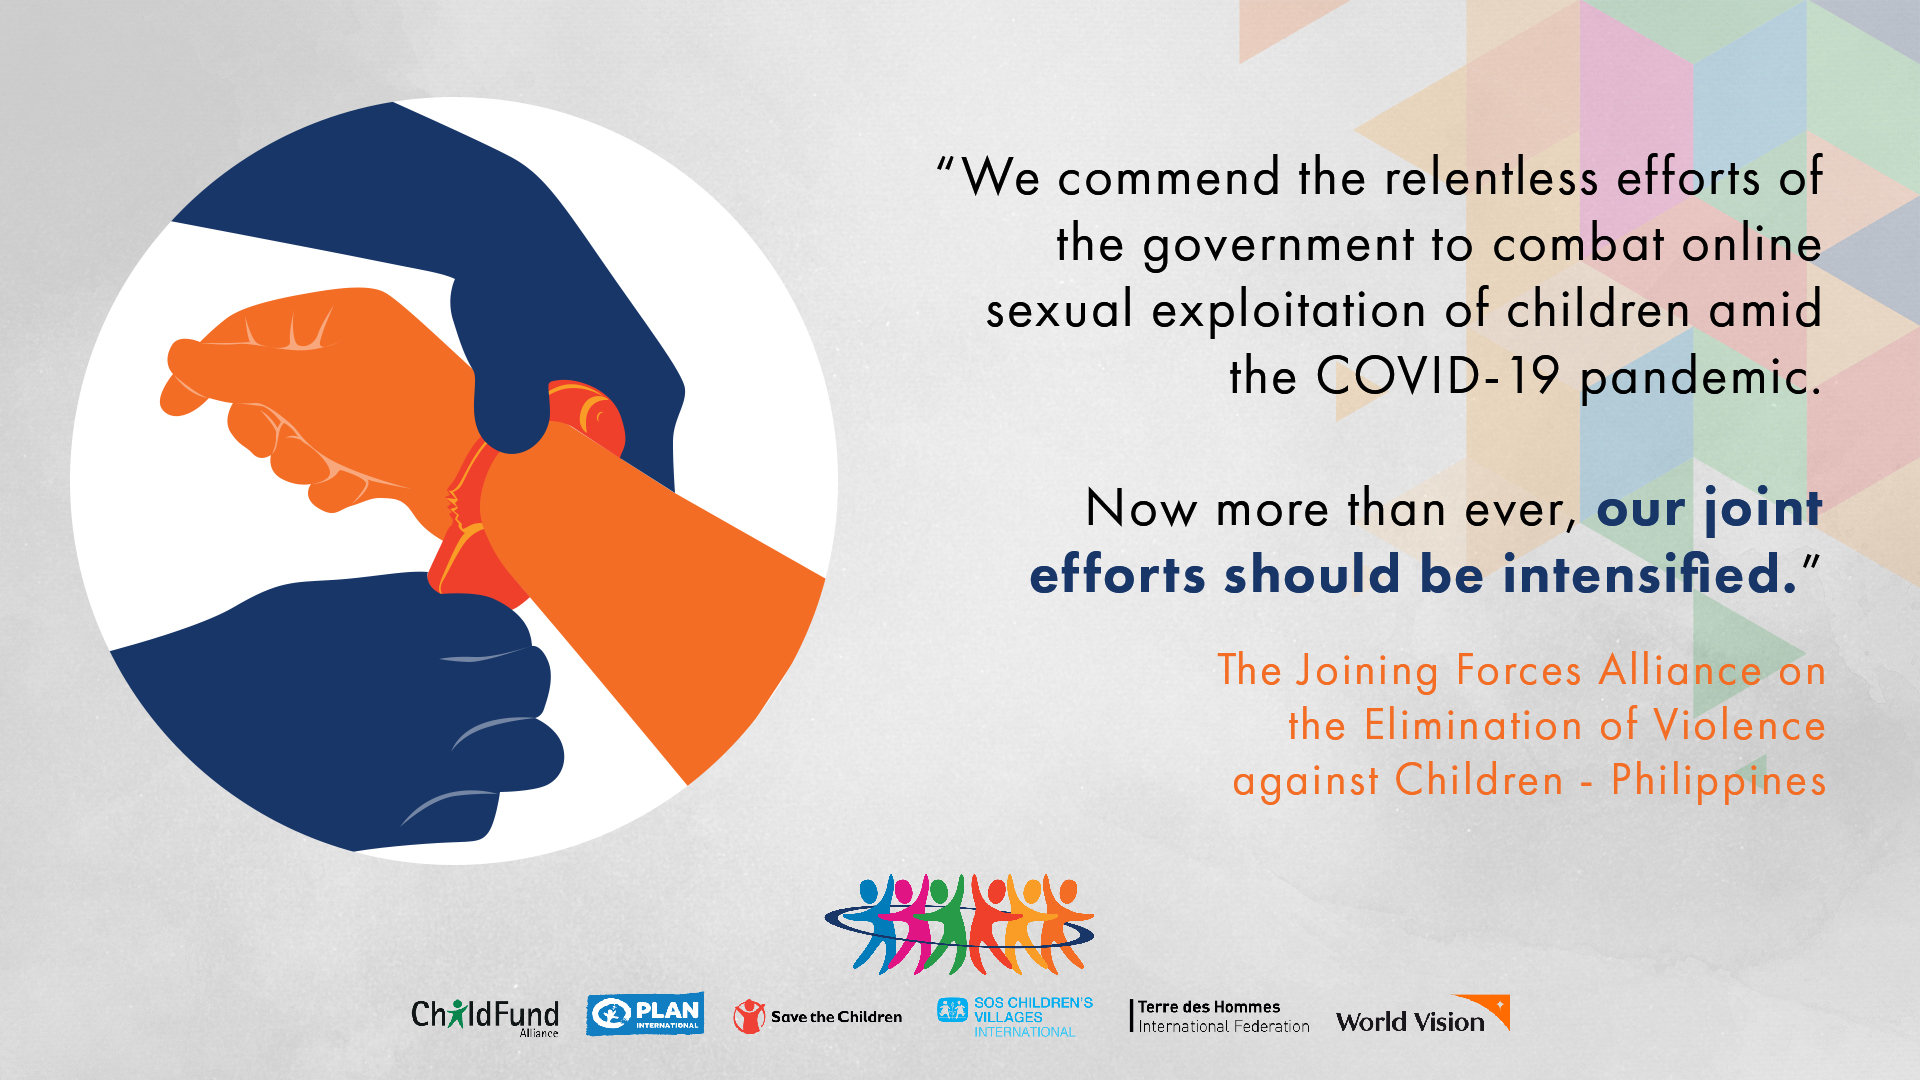 Joining Forces Alliance on the elimination of violence against Children - Philippines